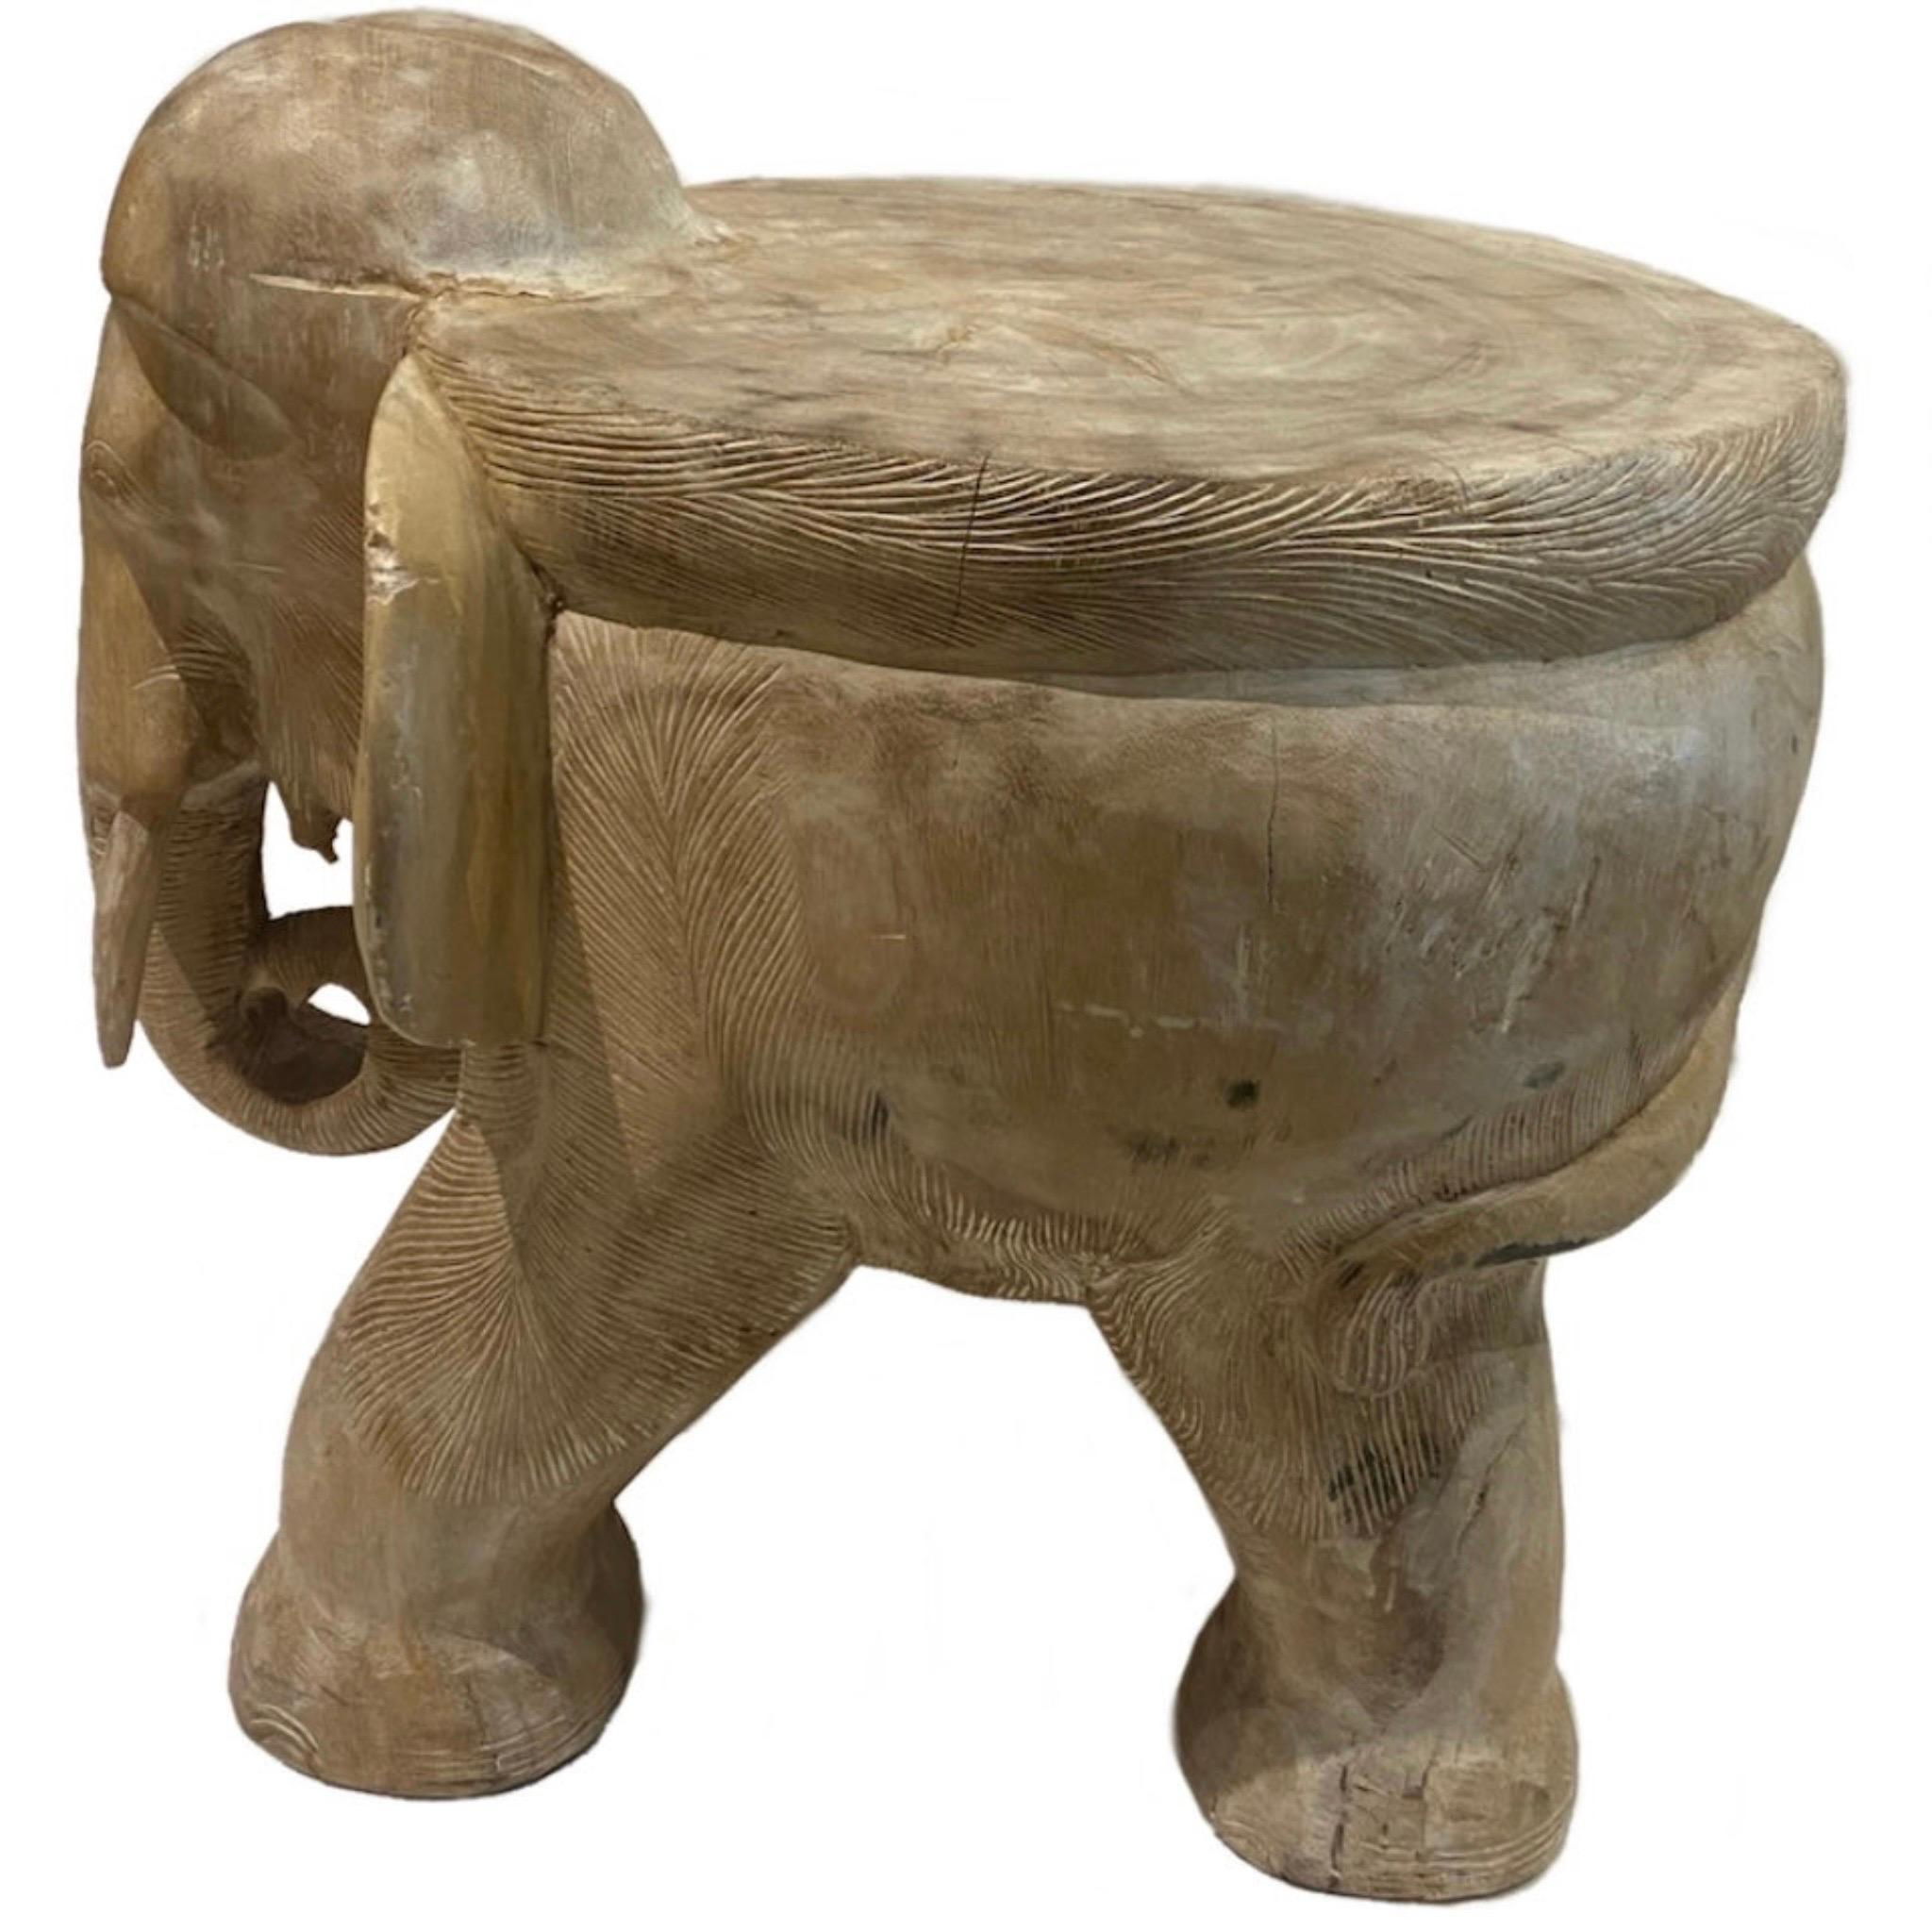 Natural carved wood elephant side table
Carved from a single piece of Blonde Tone Wood
can be used as a stool or accent table
Intricate carving details
There are a few natural cracks in the wood as shown in the images
Shows some wear on the